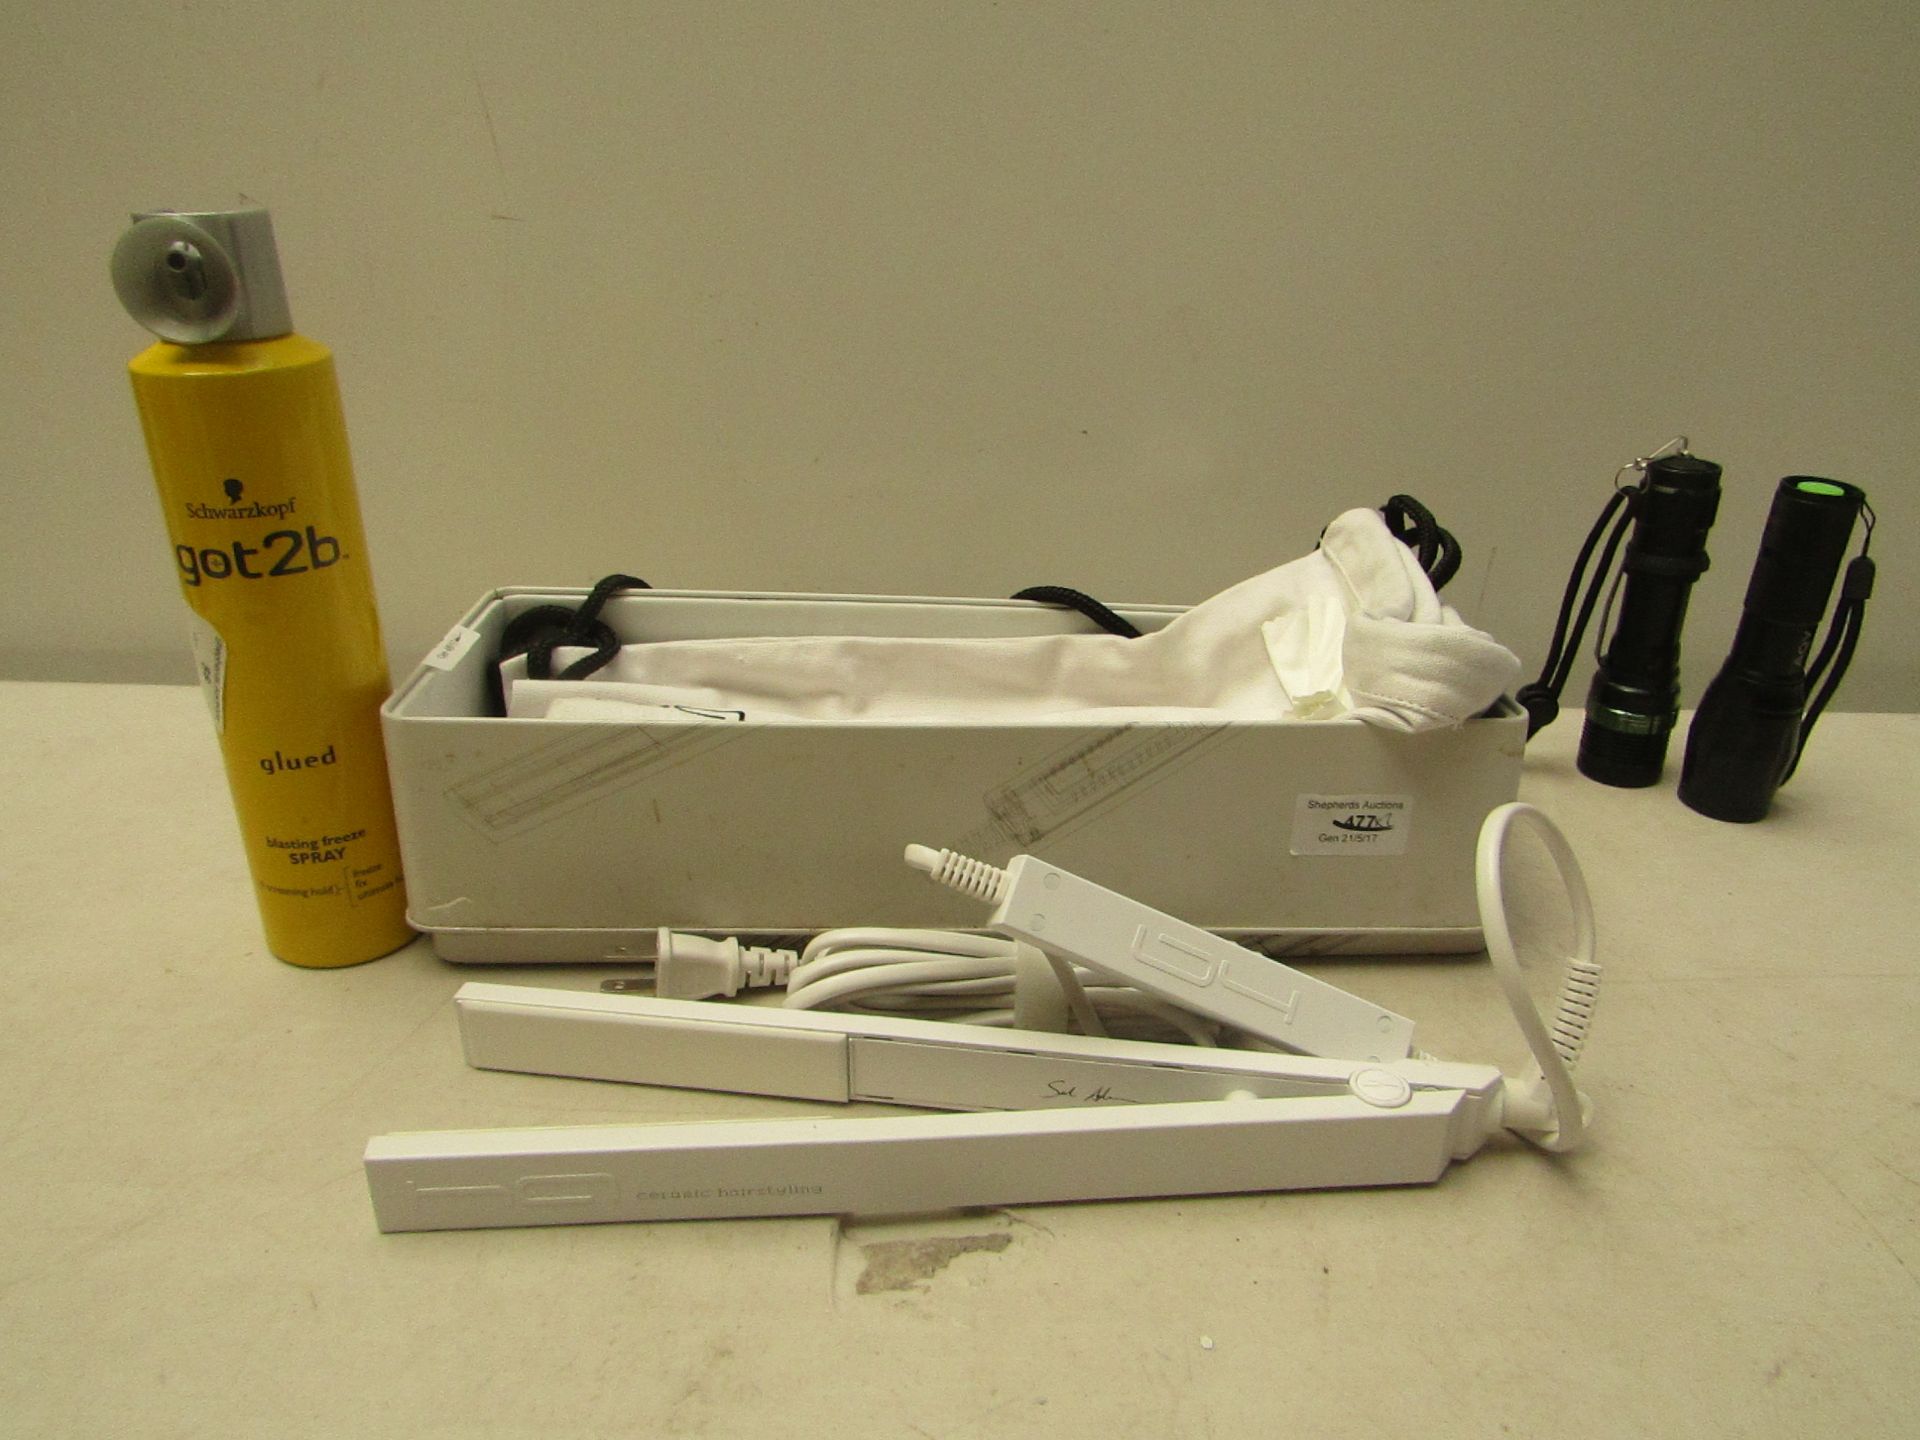 Hair set of hair straighteners and a 300ml can of Schwarzkopf got2b freeze sray.